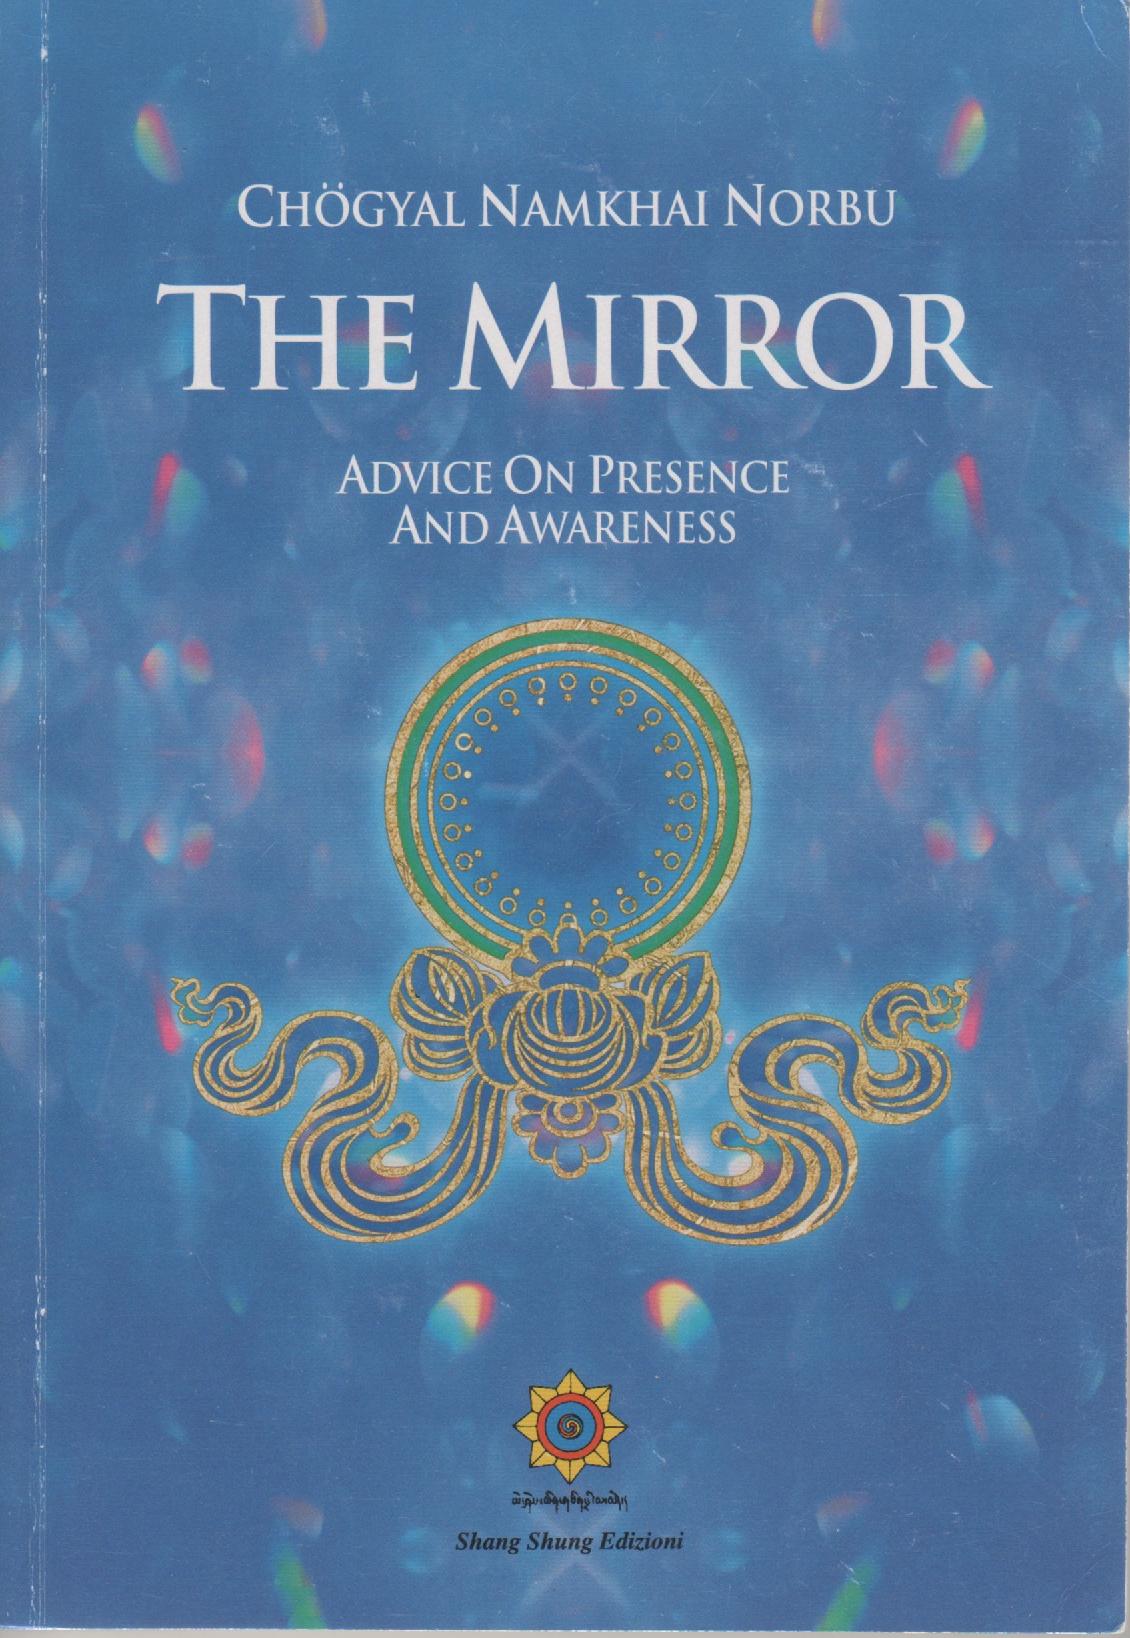 The Mirror: Advice on Presence and Awareness